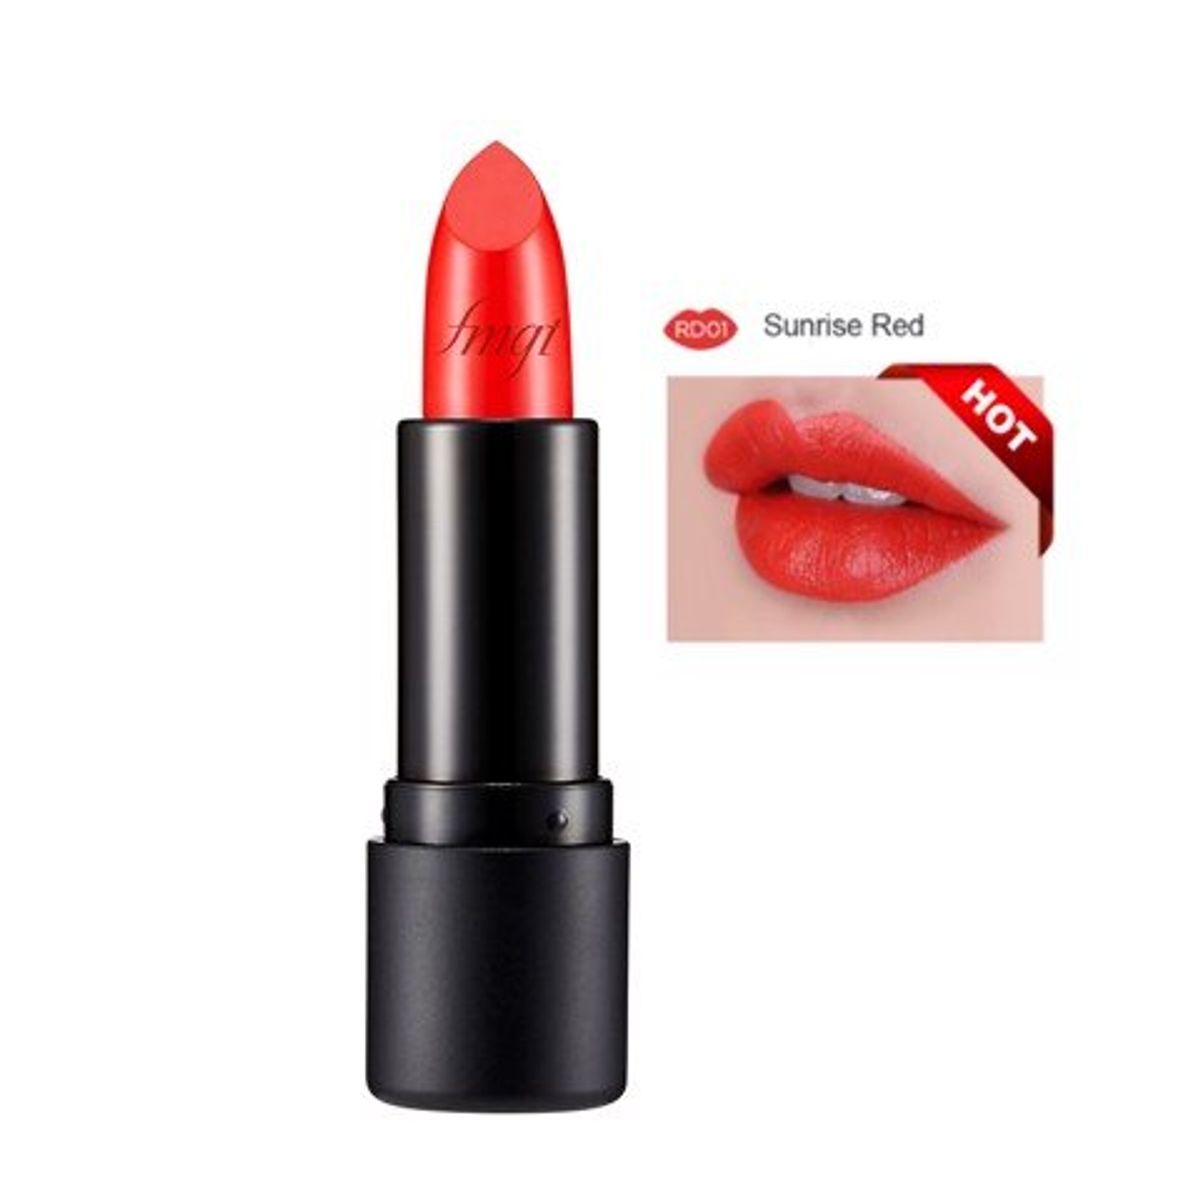 gift-limited-edition-bo-son-thoi-thefaceshop-rouge-satin-matte-set-01-red-universe-3-6gx2-1